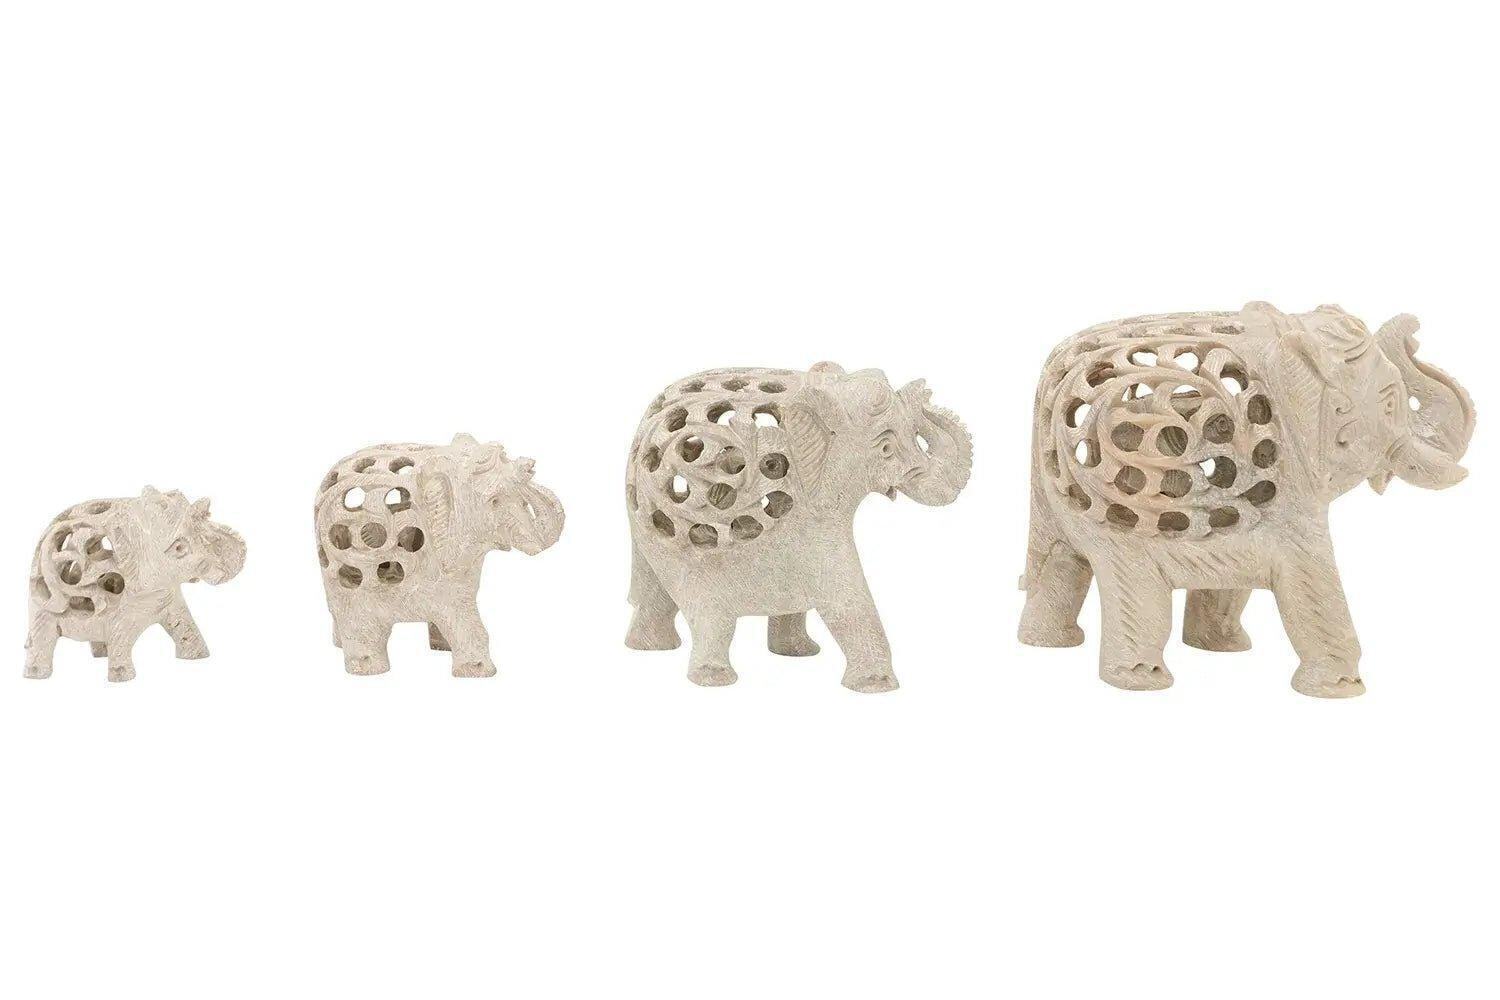 Family of Elephants Handcarved From Soapstone